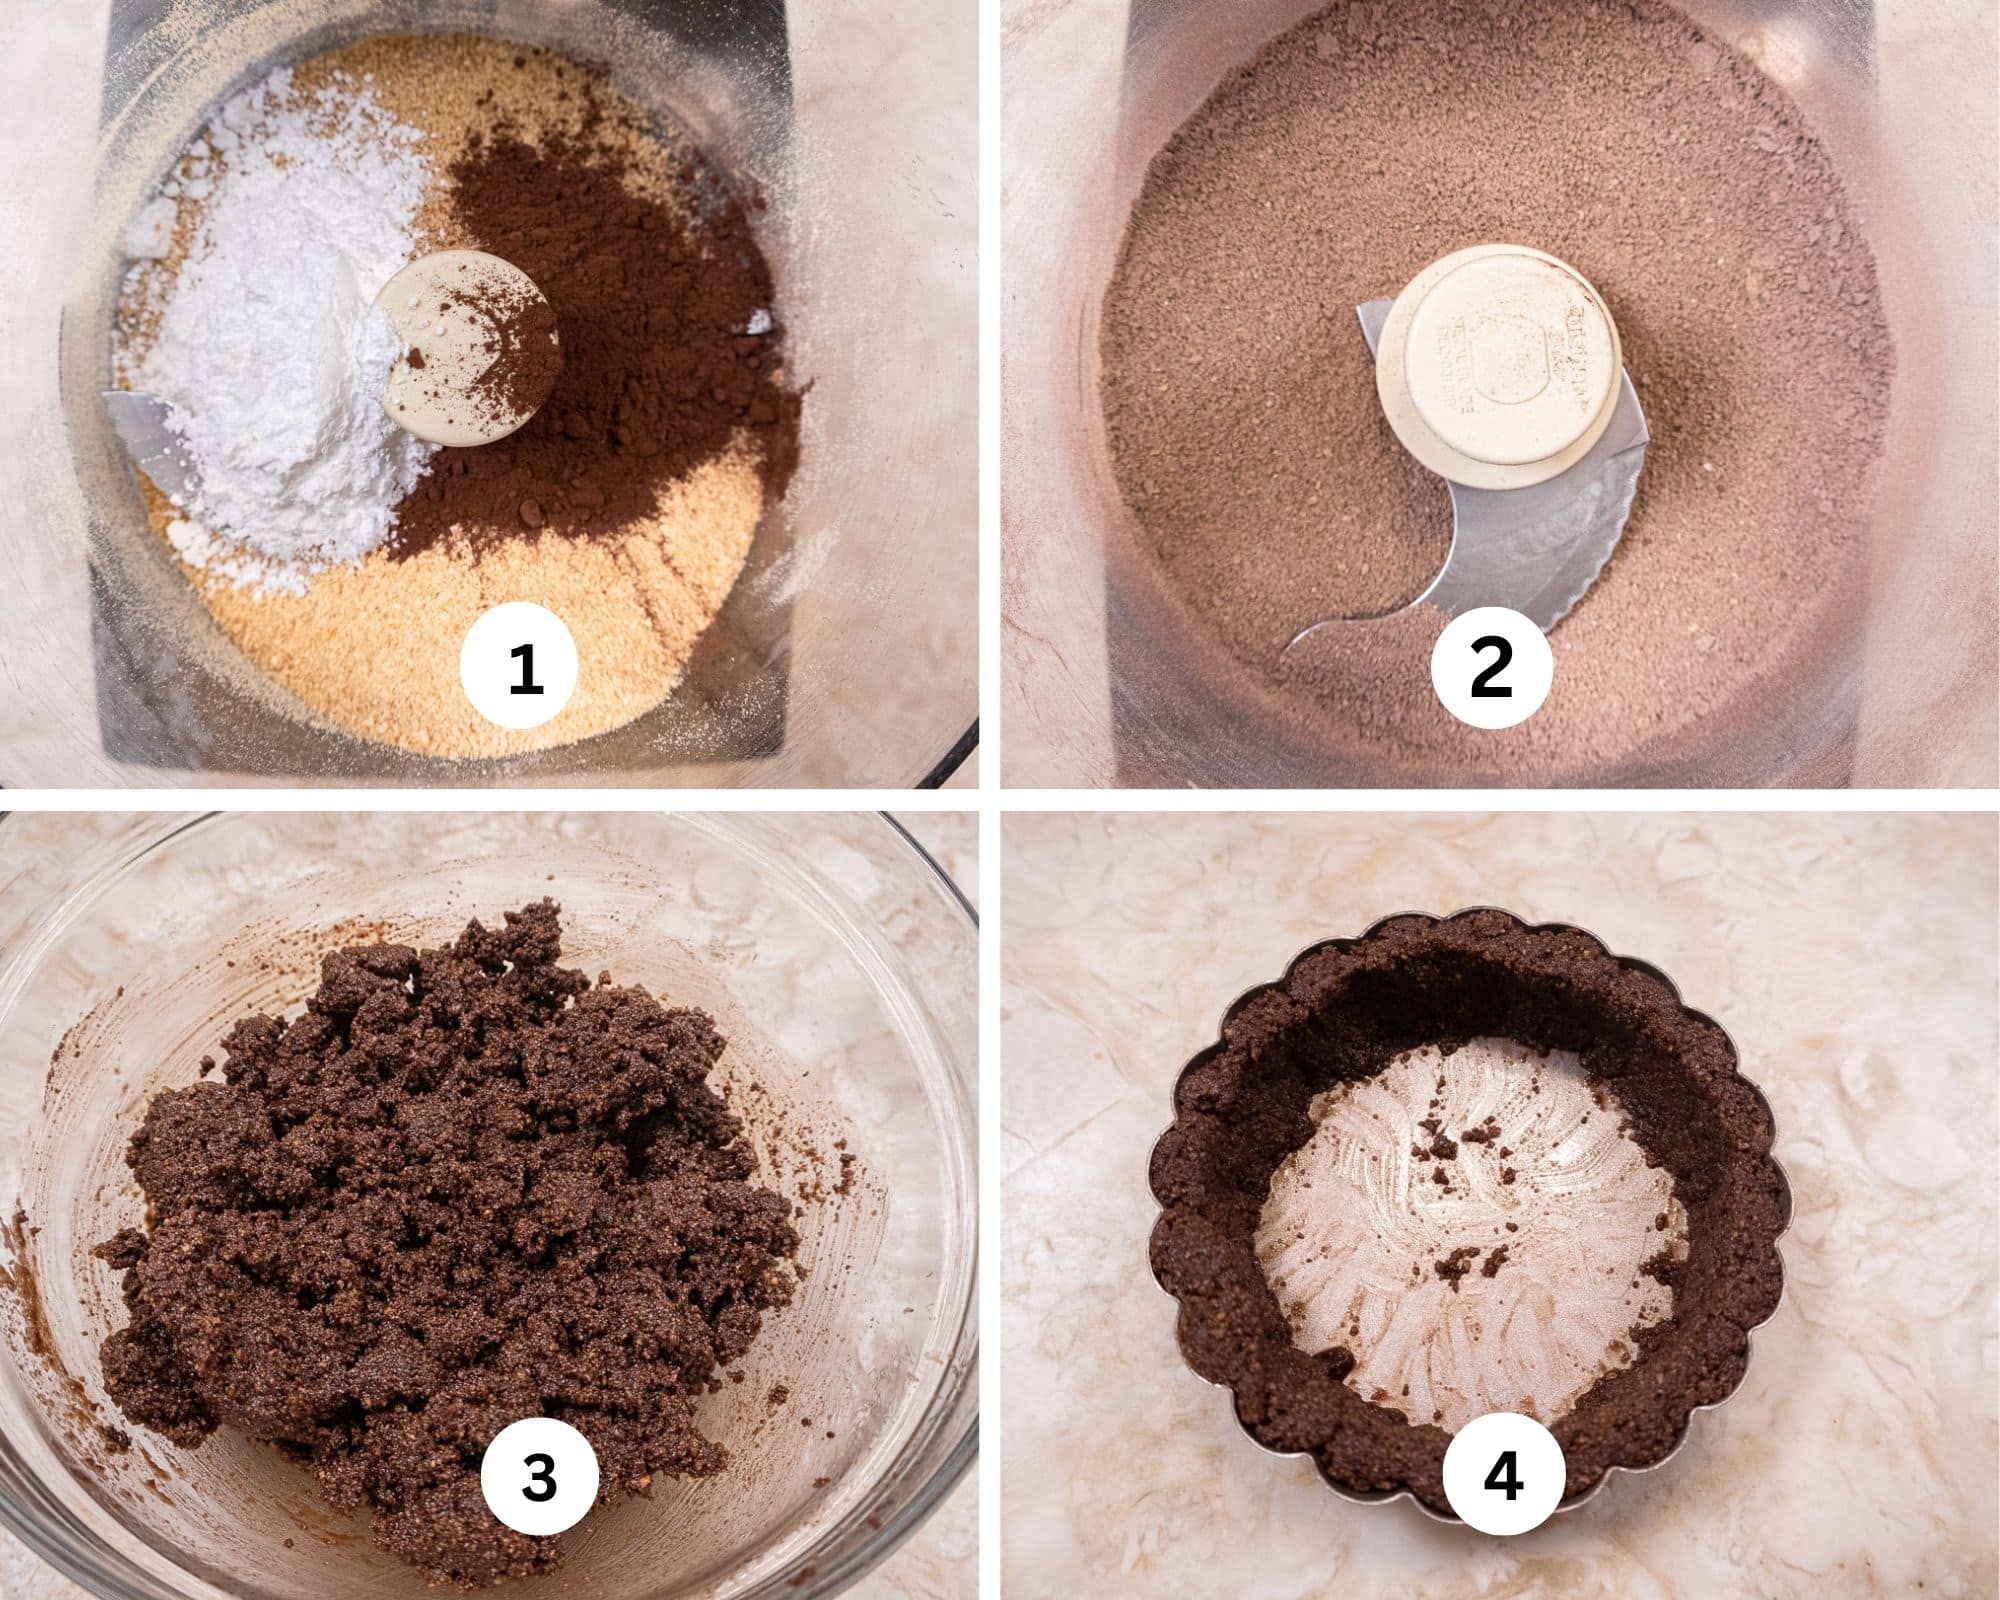 The first collage for the Chocolate Caramel Tarts shows the dry ingredients for the crust in the processor, processed, the butter added to the crumbs and pressed into the side of the tart pan.